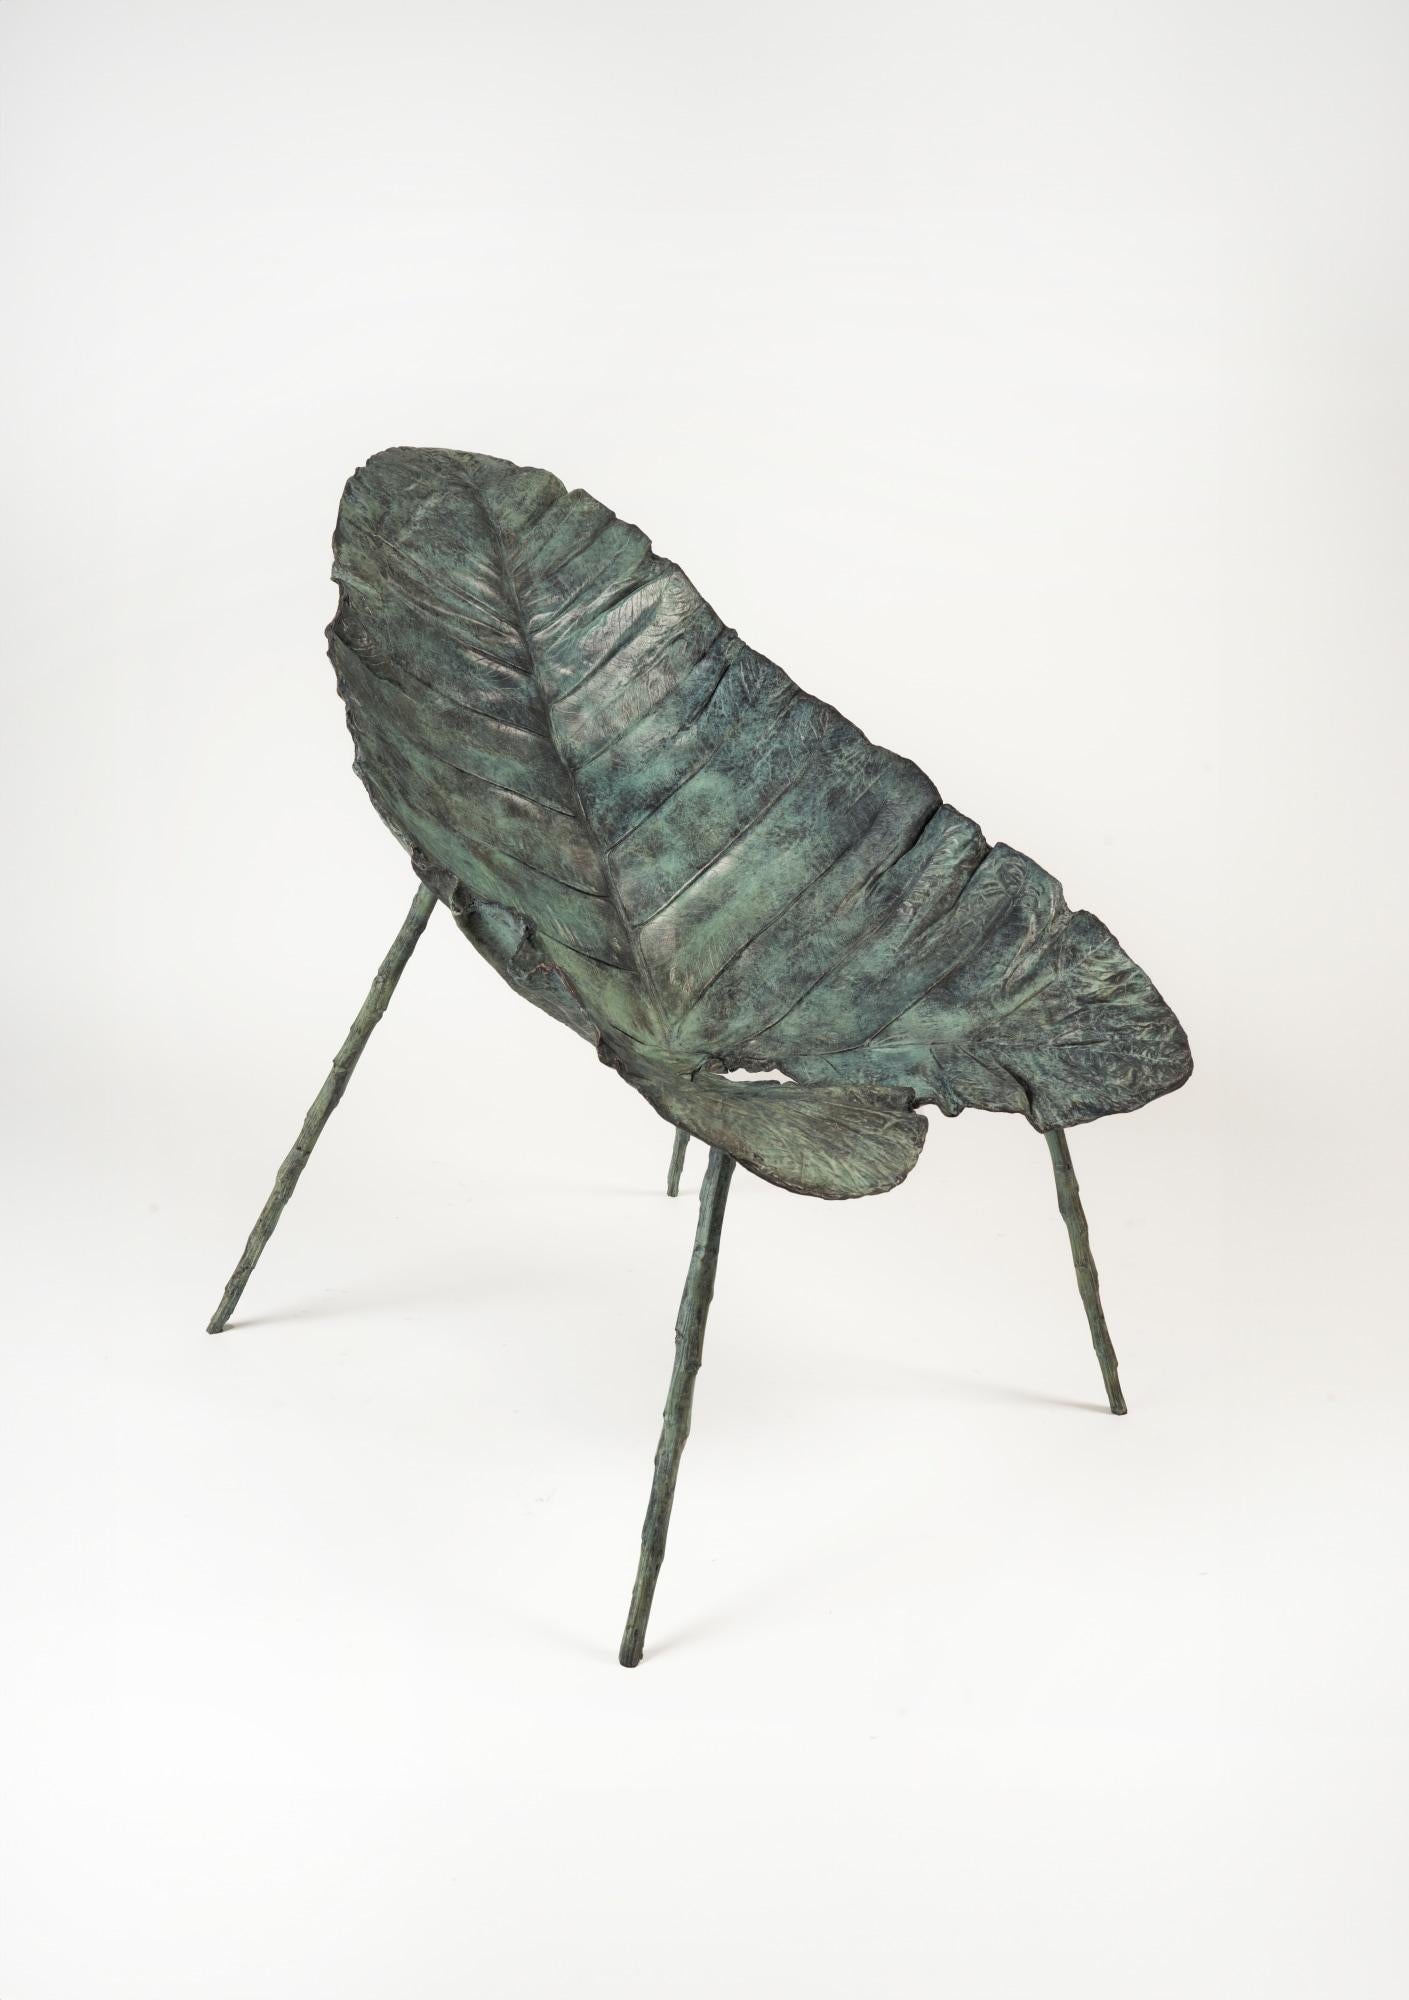 Lounge Chair by Clotilde Ancarani 
Material: Bronze, green patina
Dimensions: H 98 x 66 x 94 cm
Type: Signed, and numbered 
Year: 2021
Lead time: Available

With a keen eye for capturing the essence of life, the artist dedicates her time to